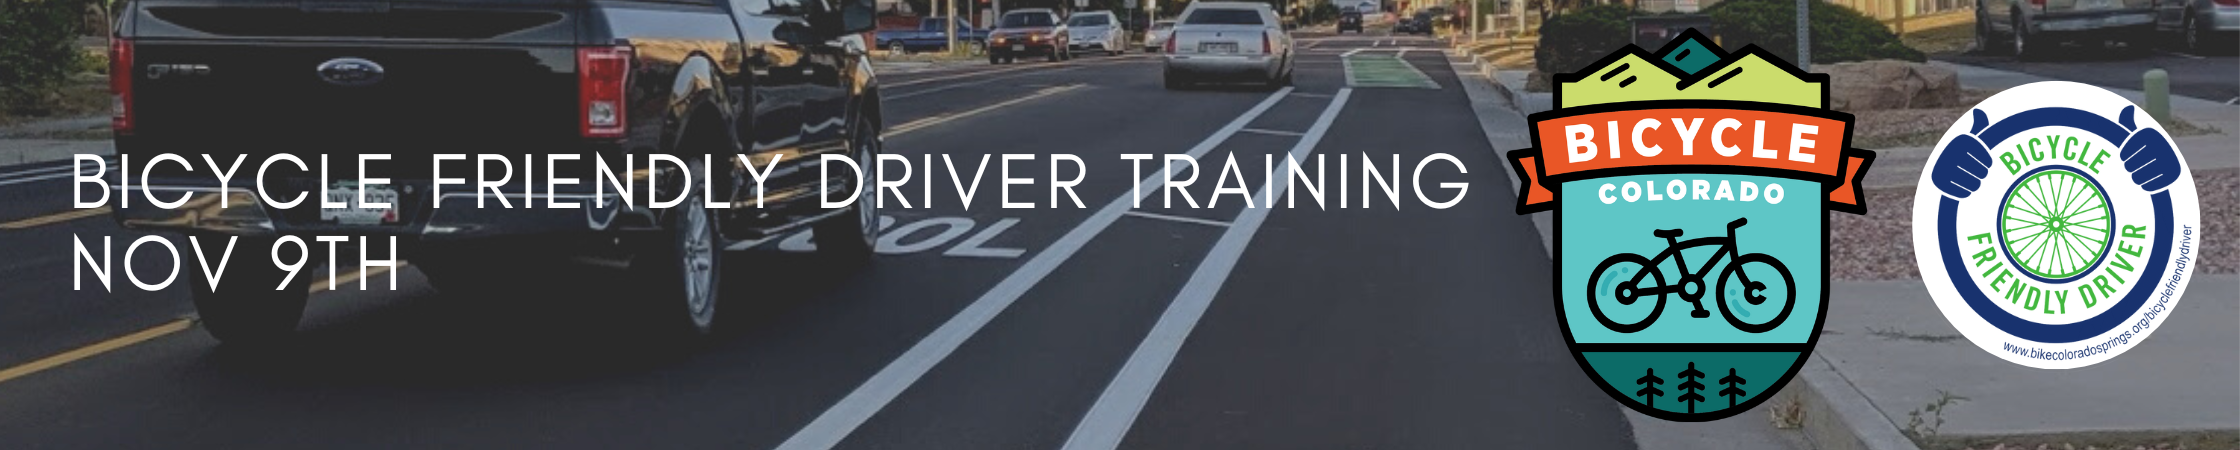 Join Bicycle Colorado’s Bicycle Friendly Driver Training On Nov 9th